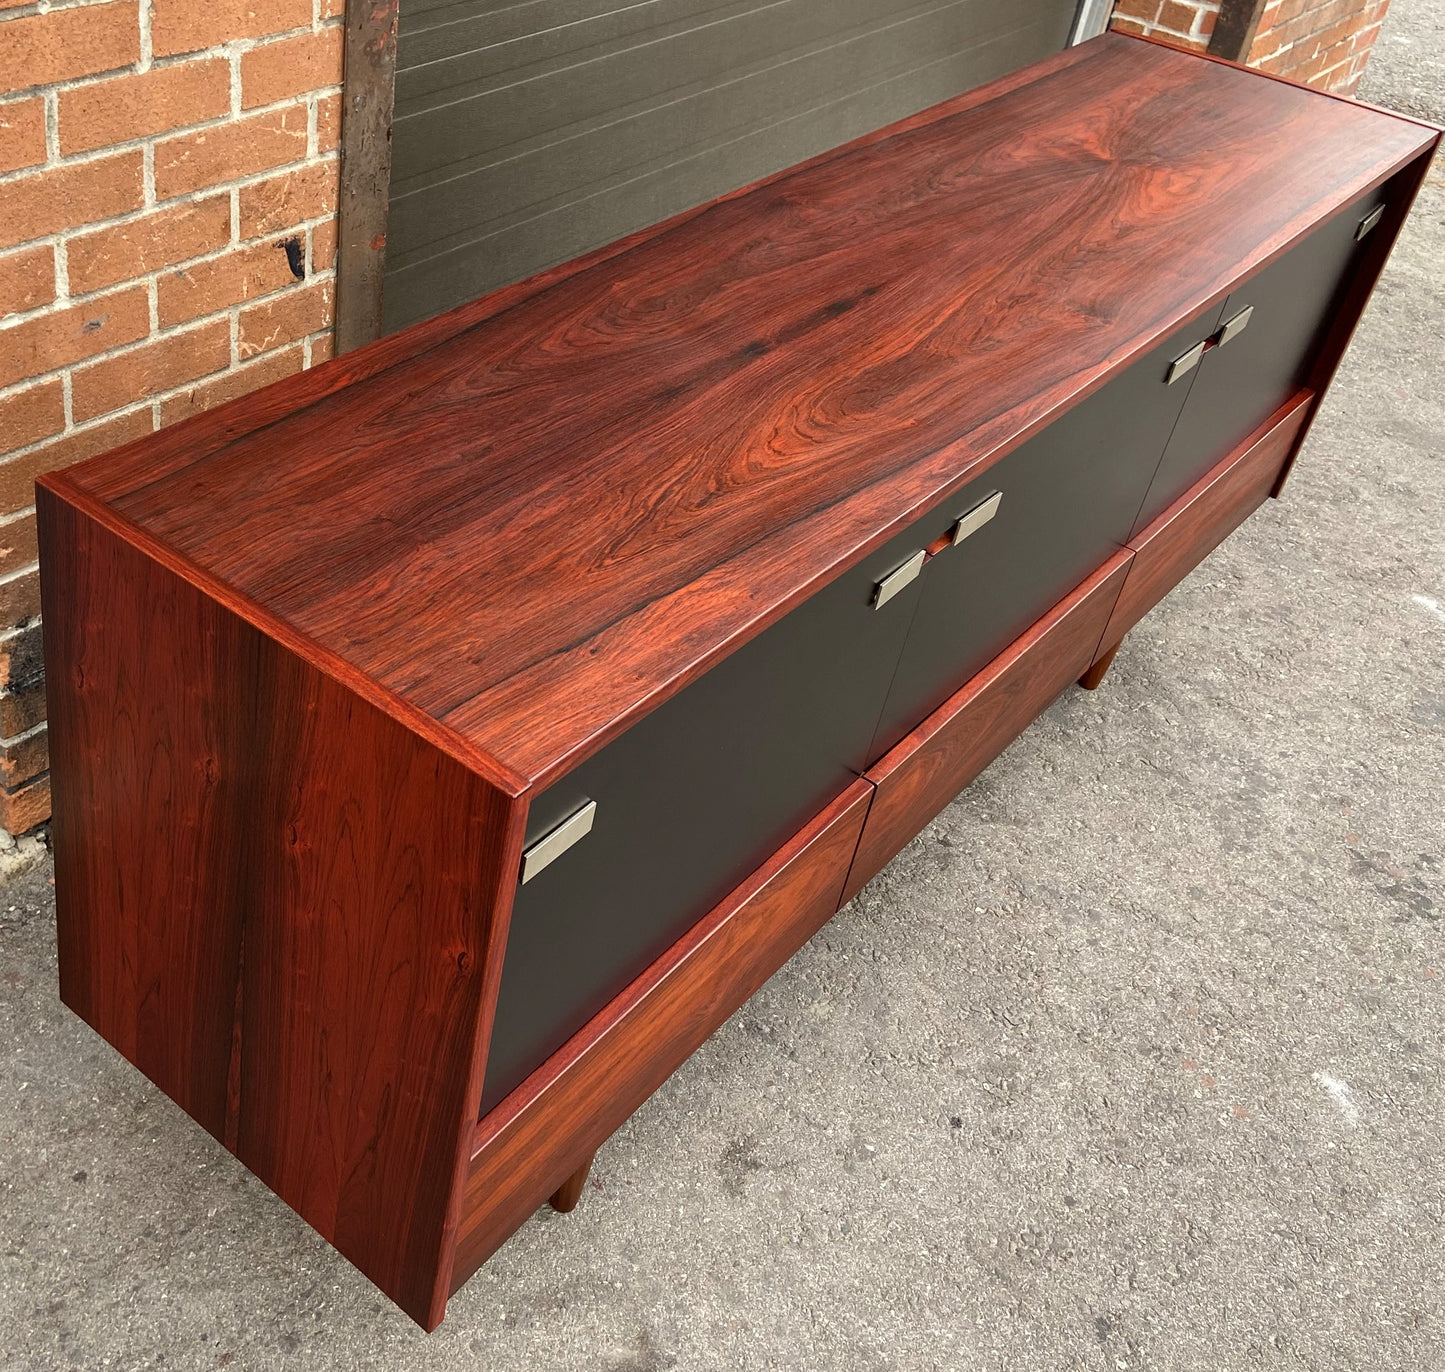 REFINISHED Mid Century Modern Rosewood Credenza w doors & drawers 73.5", Perfect